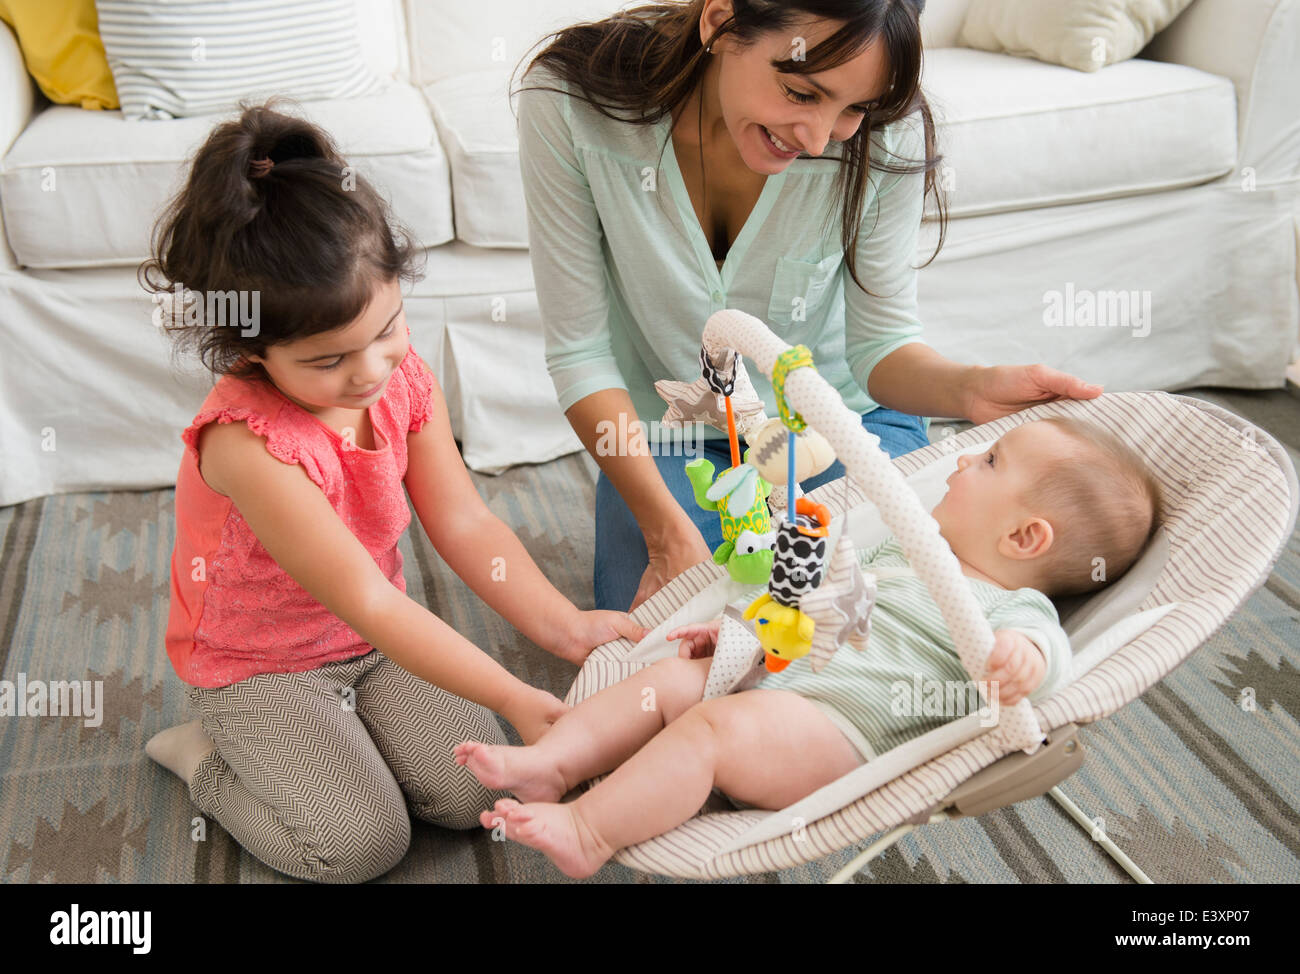 Family relaxing together in living room Stock Photo